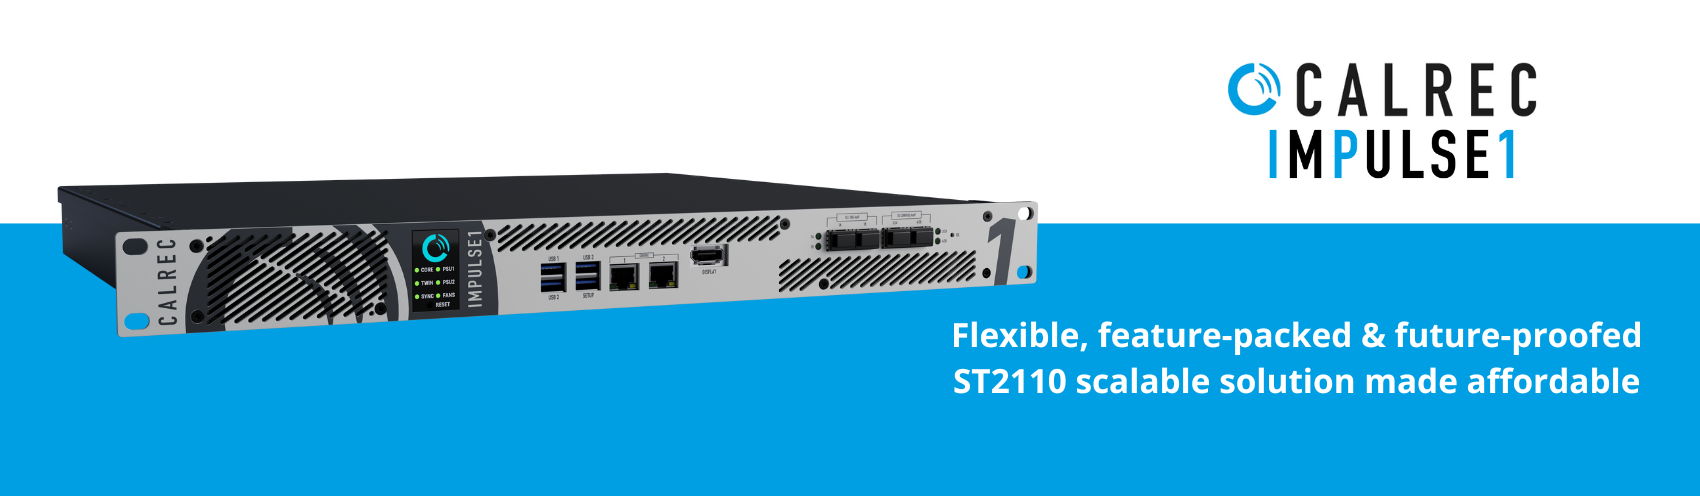 Calrec ImPulse1 - flexible, feature-packed & future-proofed ST2110 scalable solution made affordable